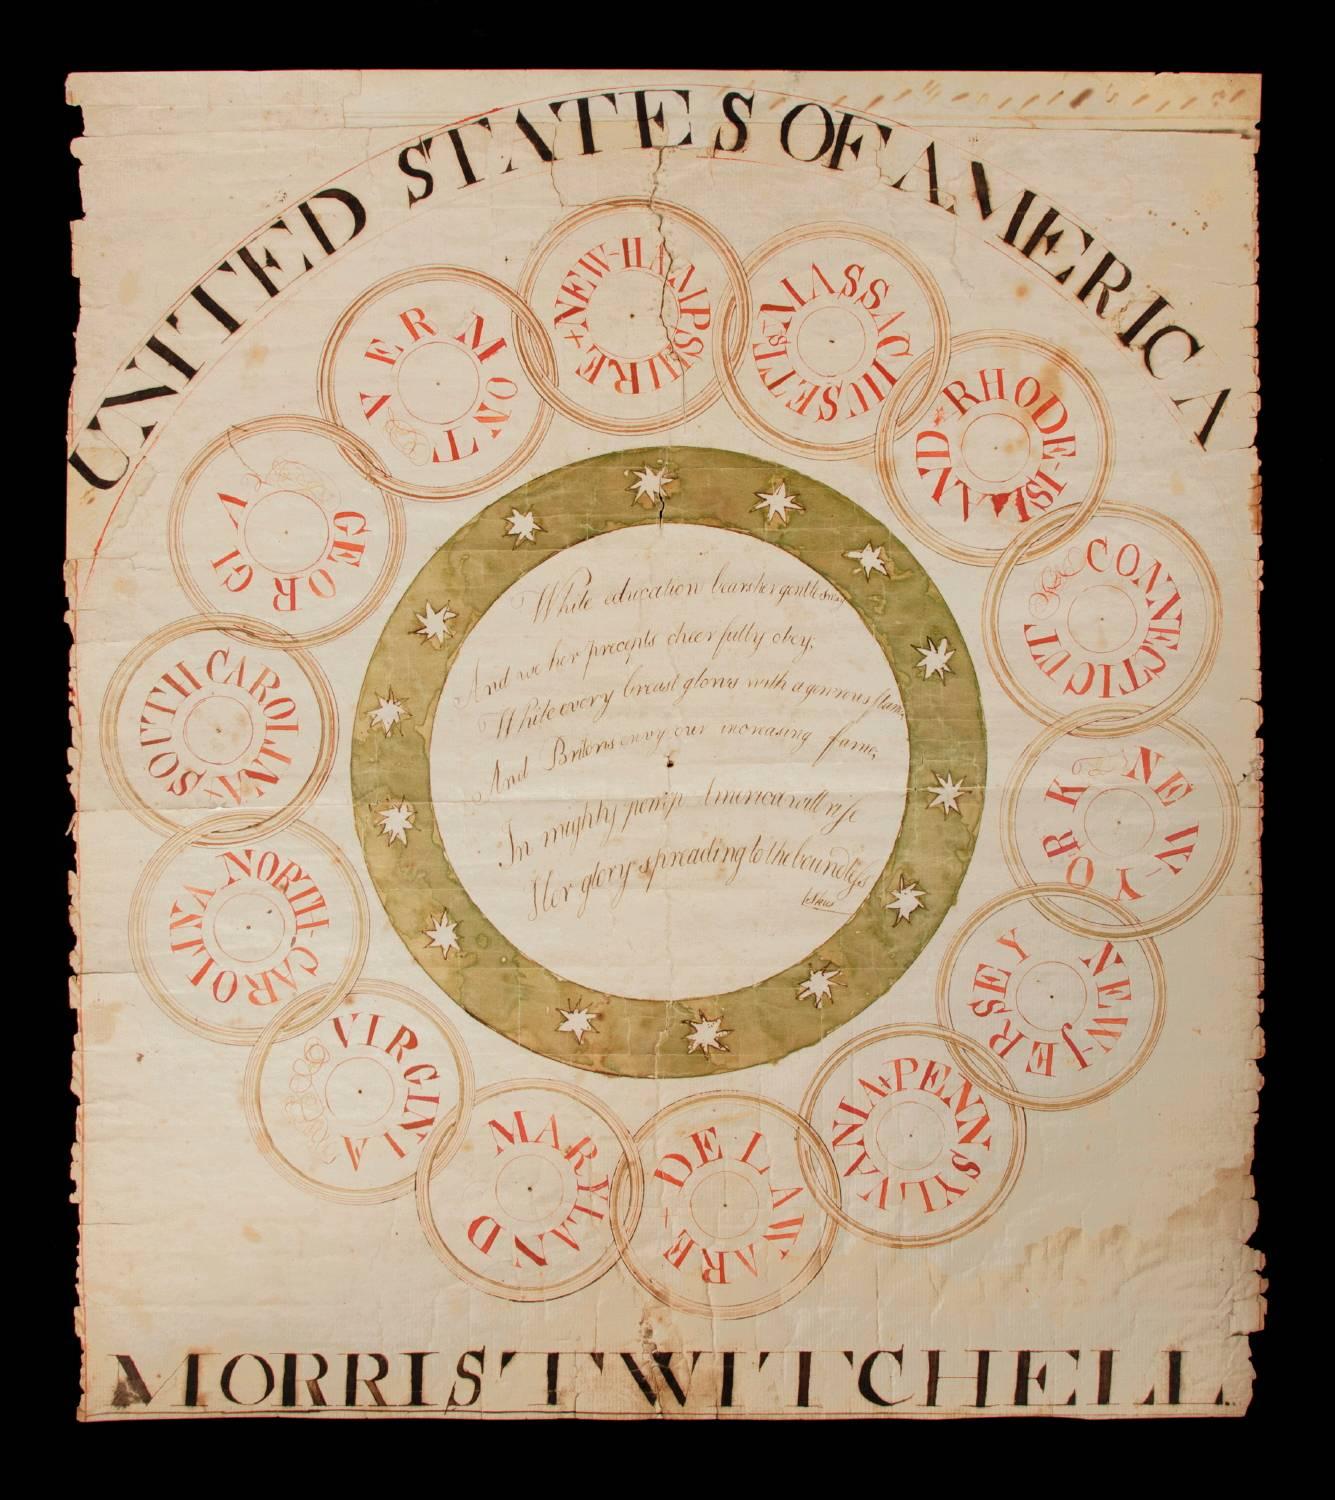 Remarkable patriotic schoolchild watercolor by Morris Twitchell, illustrating the original 13 colonies plus vermont as conjoined rings, 1791-1792:

Executed on laid paper, this beautiful patriotic pen and ink, watercolor fraktur drawing, entitled